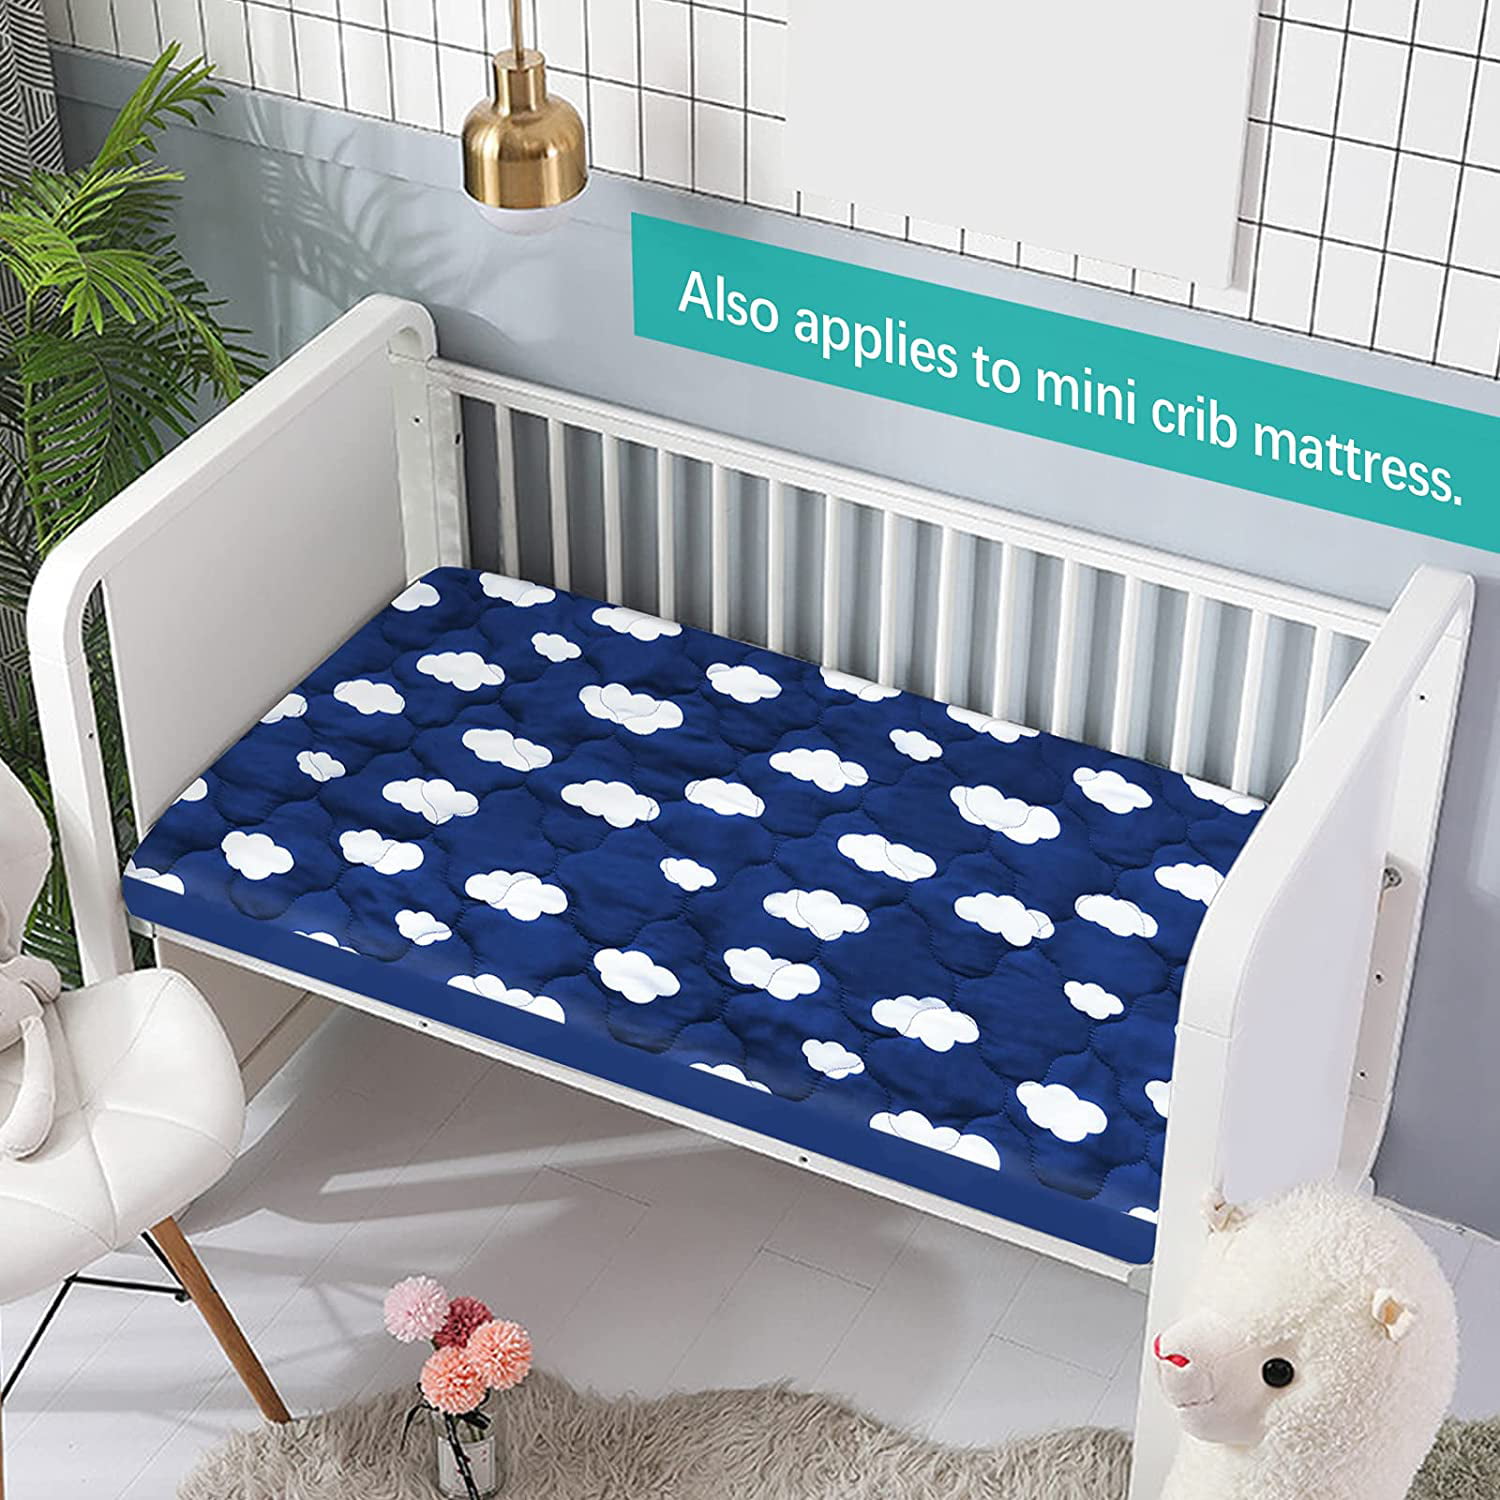 89 X 38 X 4 cm Baby Toddler COT Crib Bed Breathable Quilted and Waterproof Foam Mattress Crib Mattress Nursery Baby Breathable Waterproof Cradle Pram Swing 